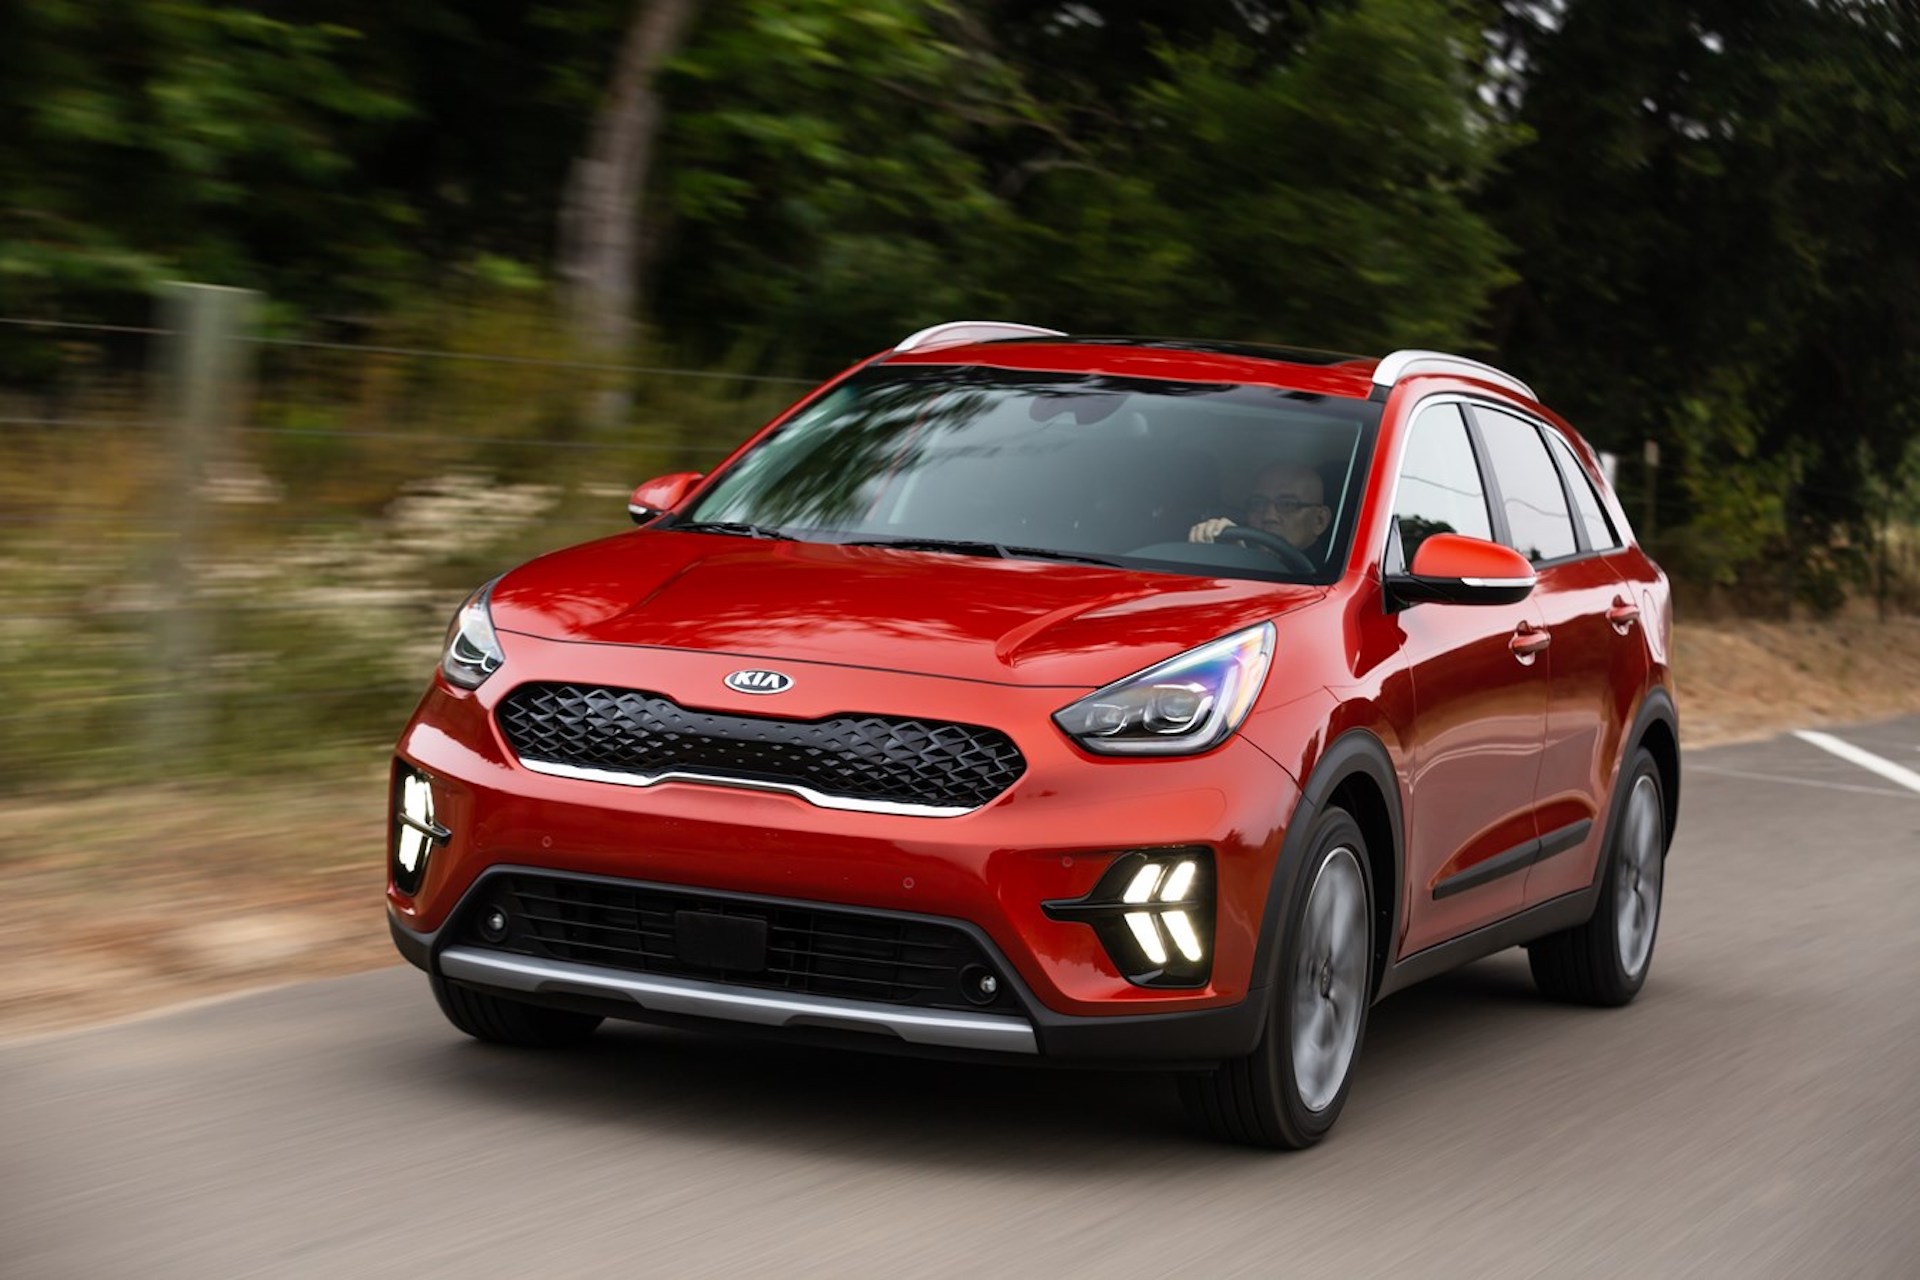 New and Used Kia Niro Prices, Photos, Reviews, Specs The Car Connection